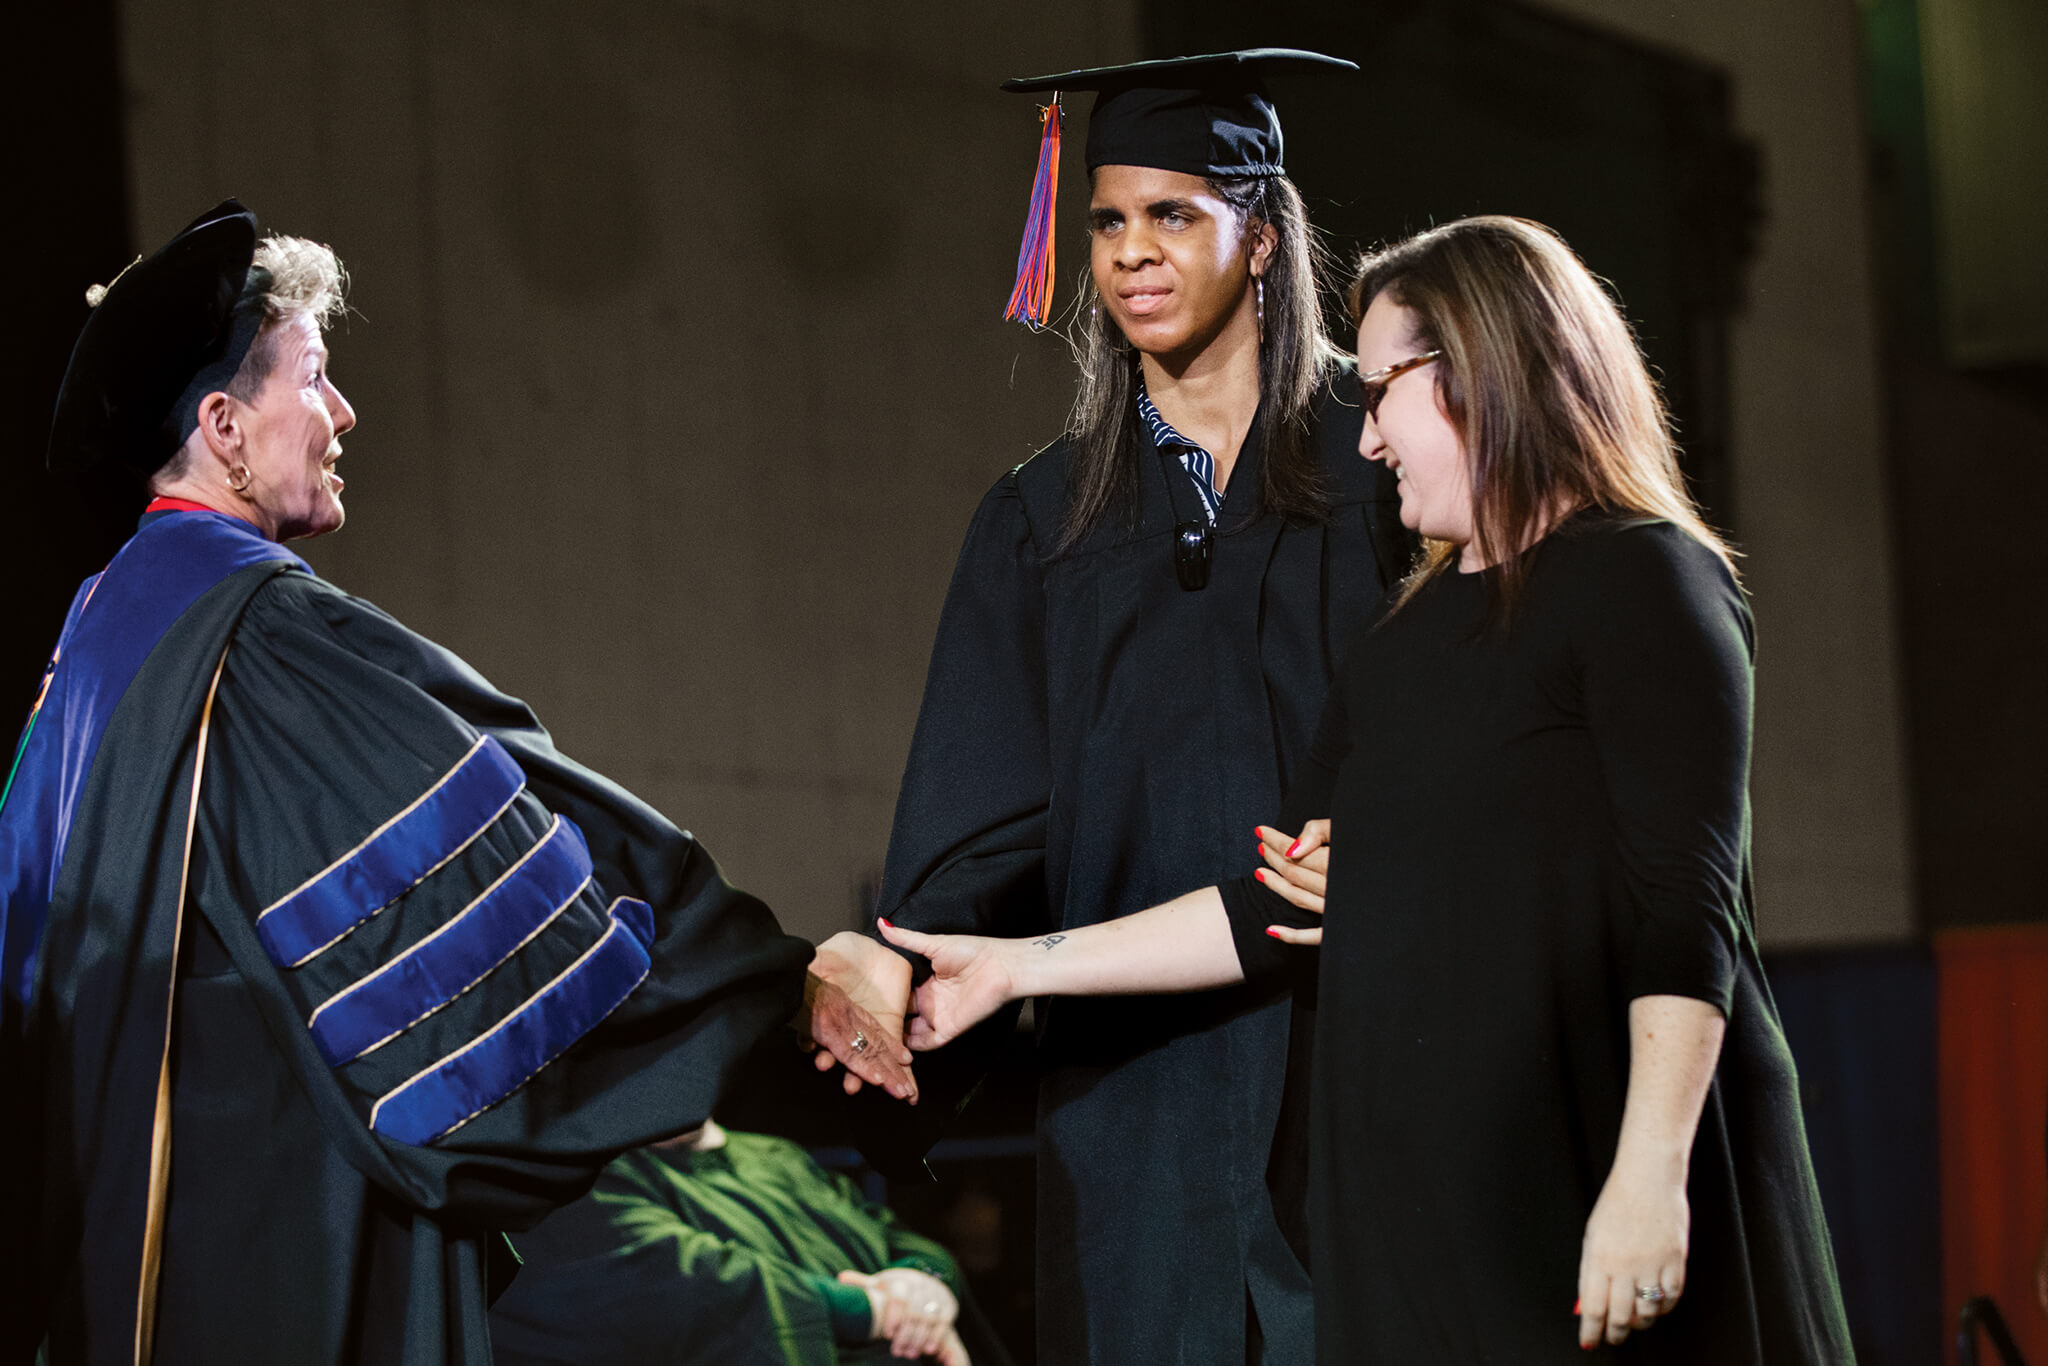 Ashley Jackson (center), of Jackson), crossed the commencement stage Dec. 15 to receive her bachelor’s degree from the University of Tennessee at Martin. Jackson is a deaf-blind student and plans to use her degree to assist children and families with various disabilities. She is pictured shaking the hand of  with the assistance of Lisa Cepparulo, an American Sign Language interpreter from the Jackson Star Center. Cepparulo and two other interpreters have worked with Jackson throughout her time at UT Martin.